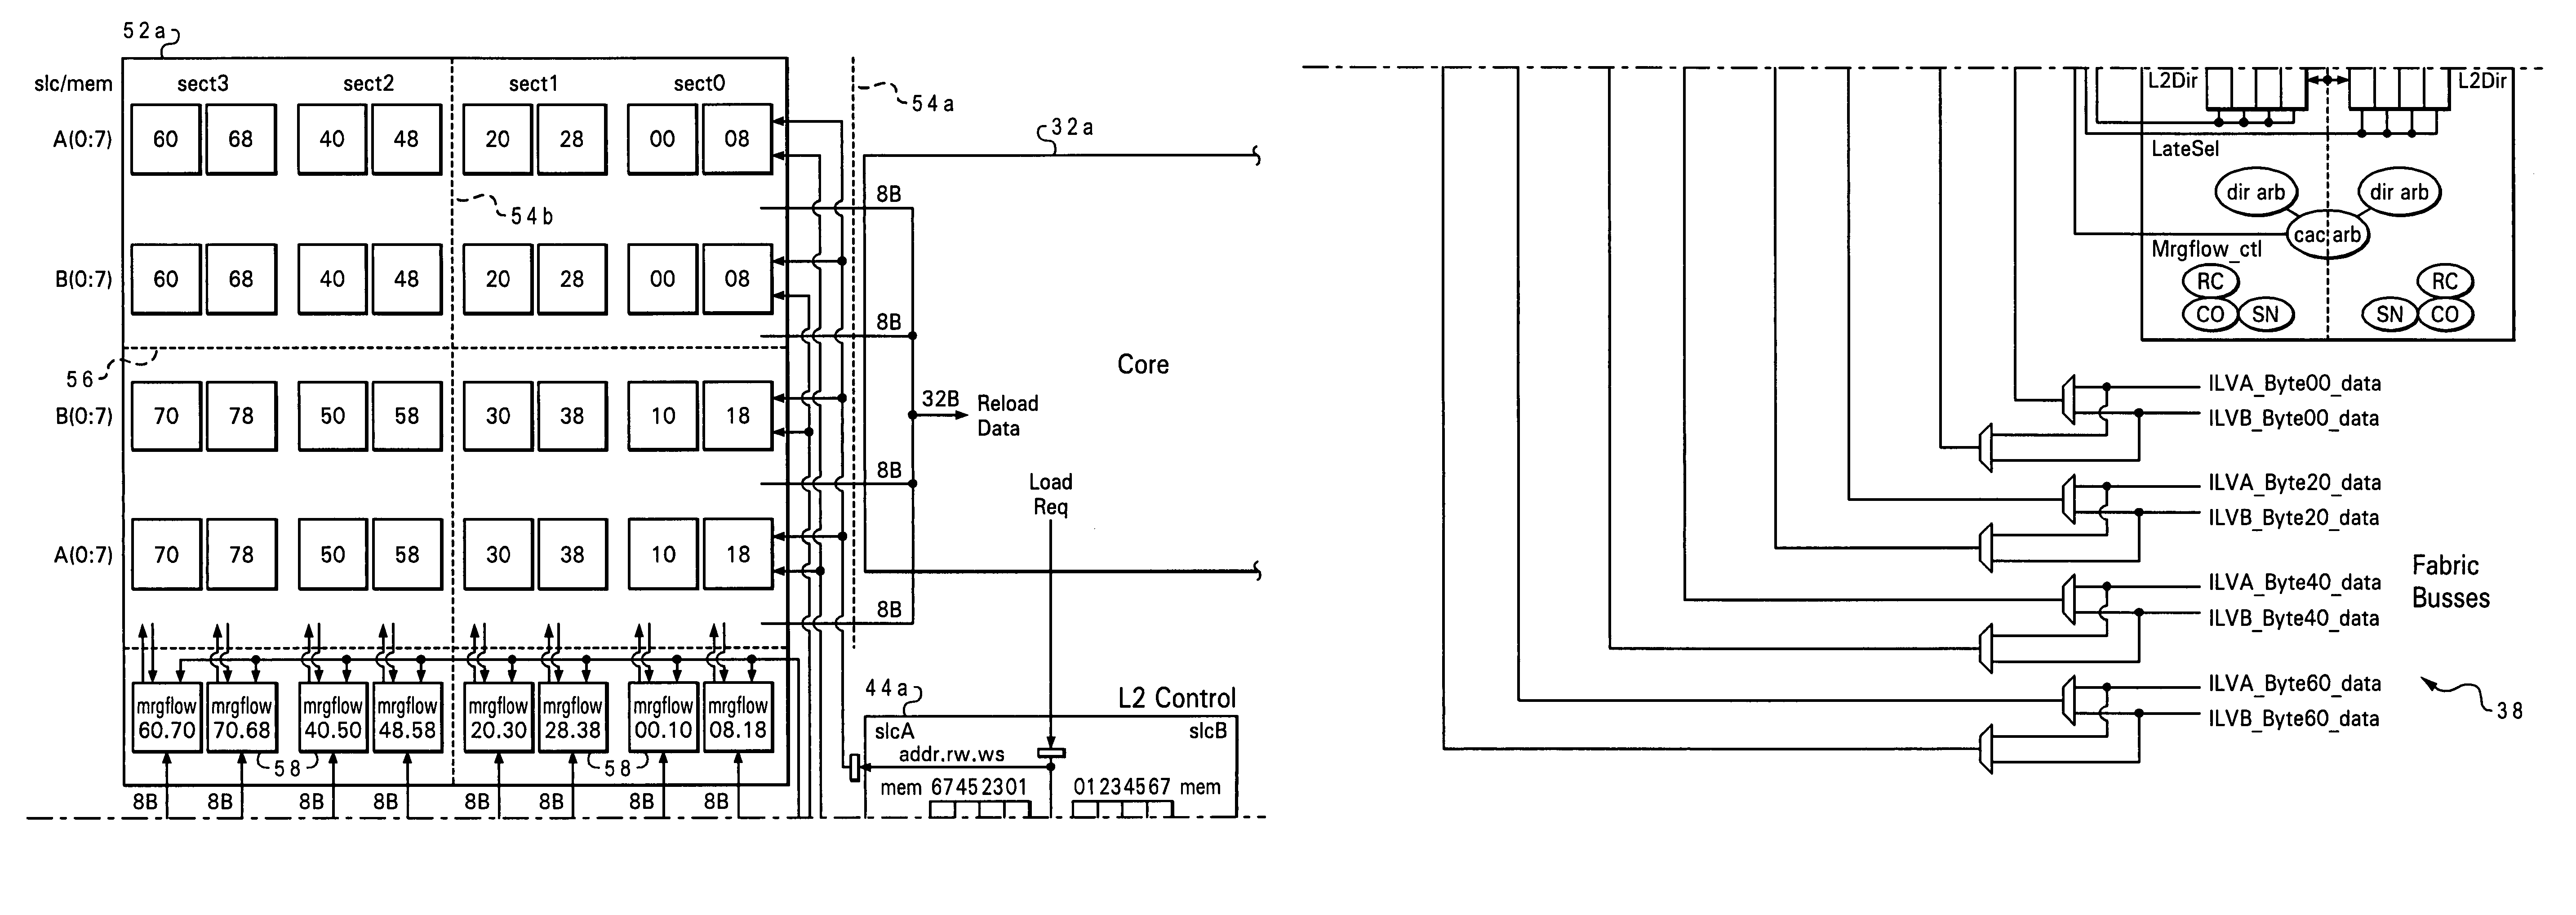 System bus structure for large L2 cache array topology with different latency domains